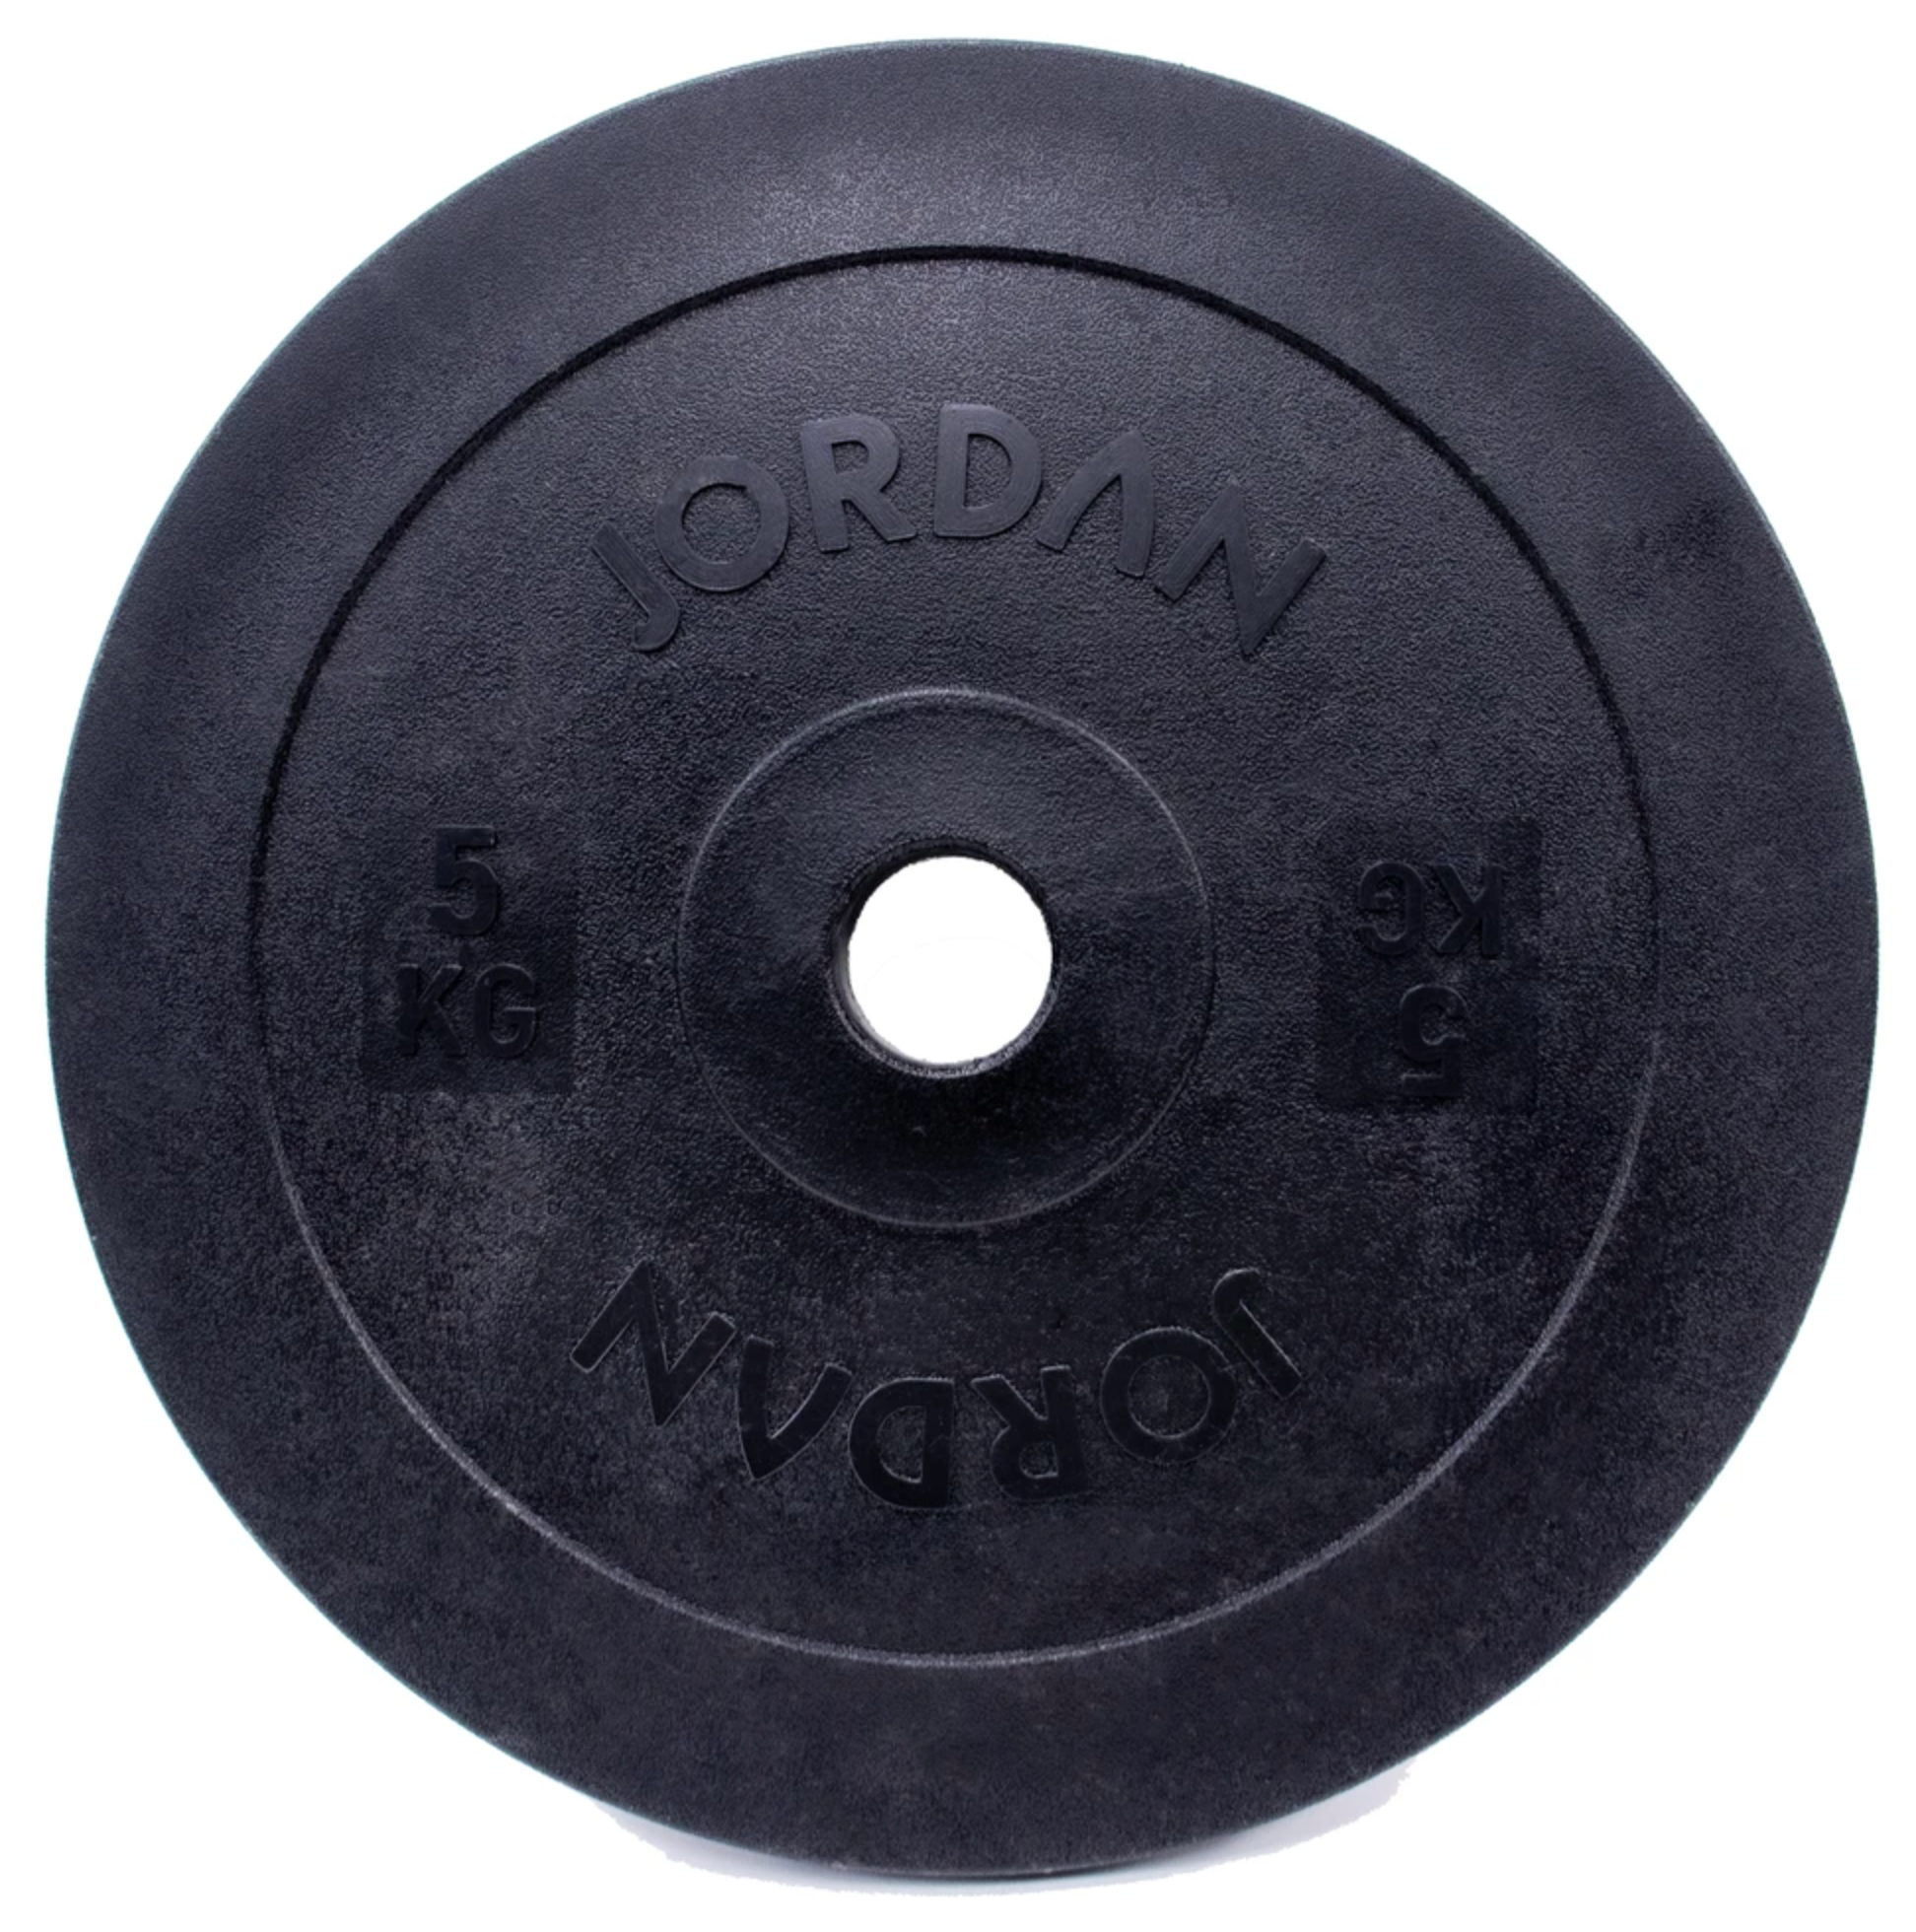 Jordan Olympic Technique Plates (up to 5kg)